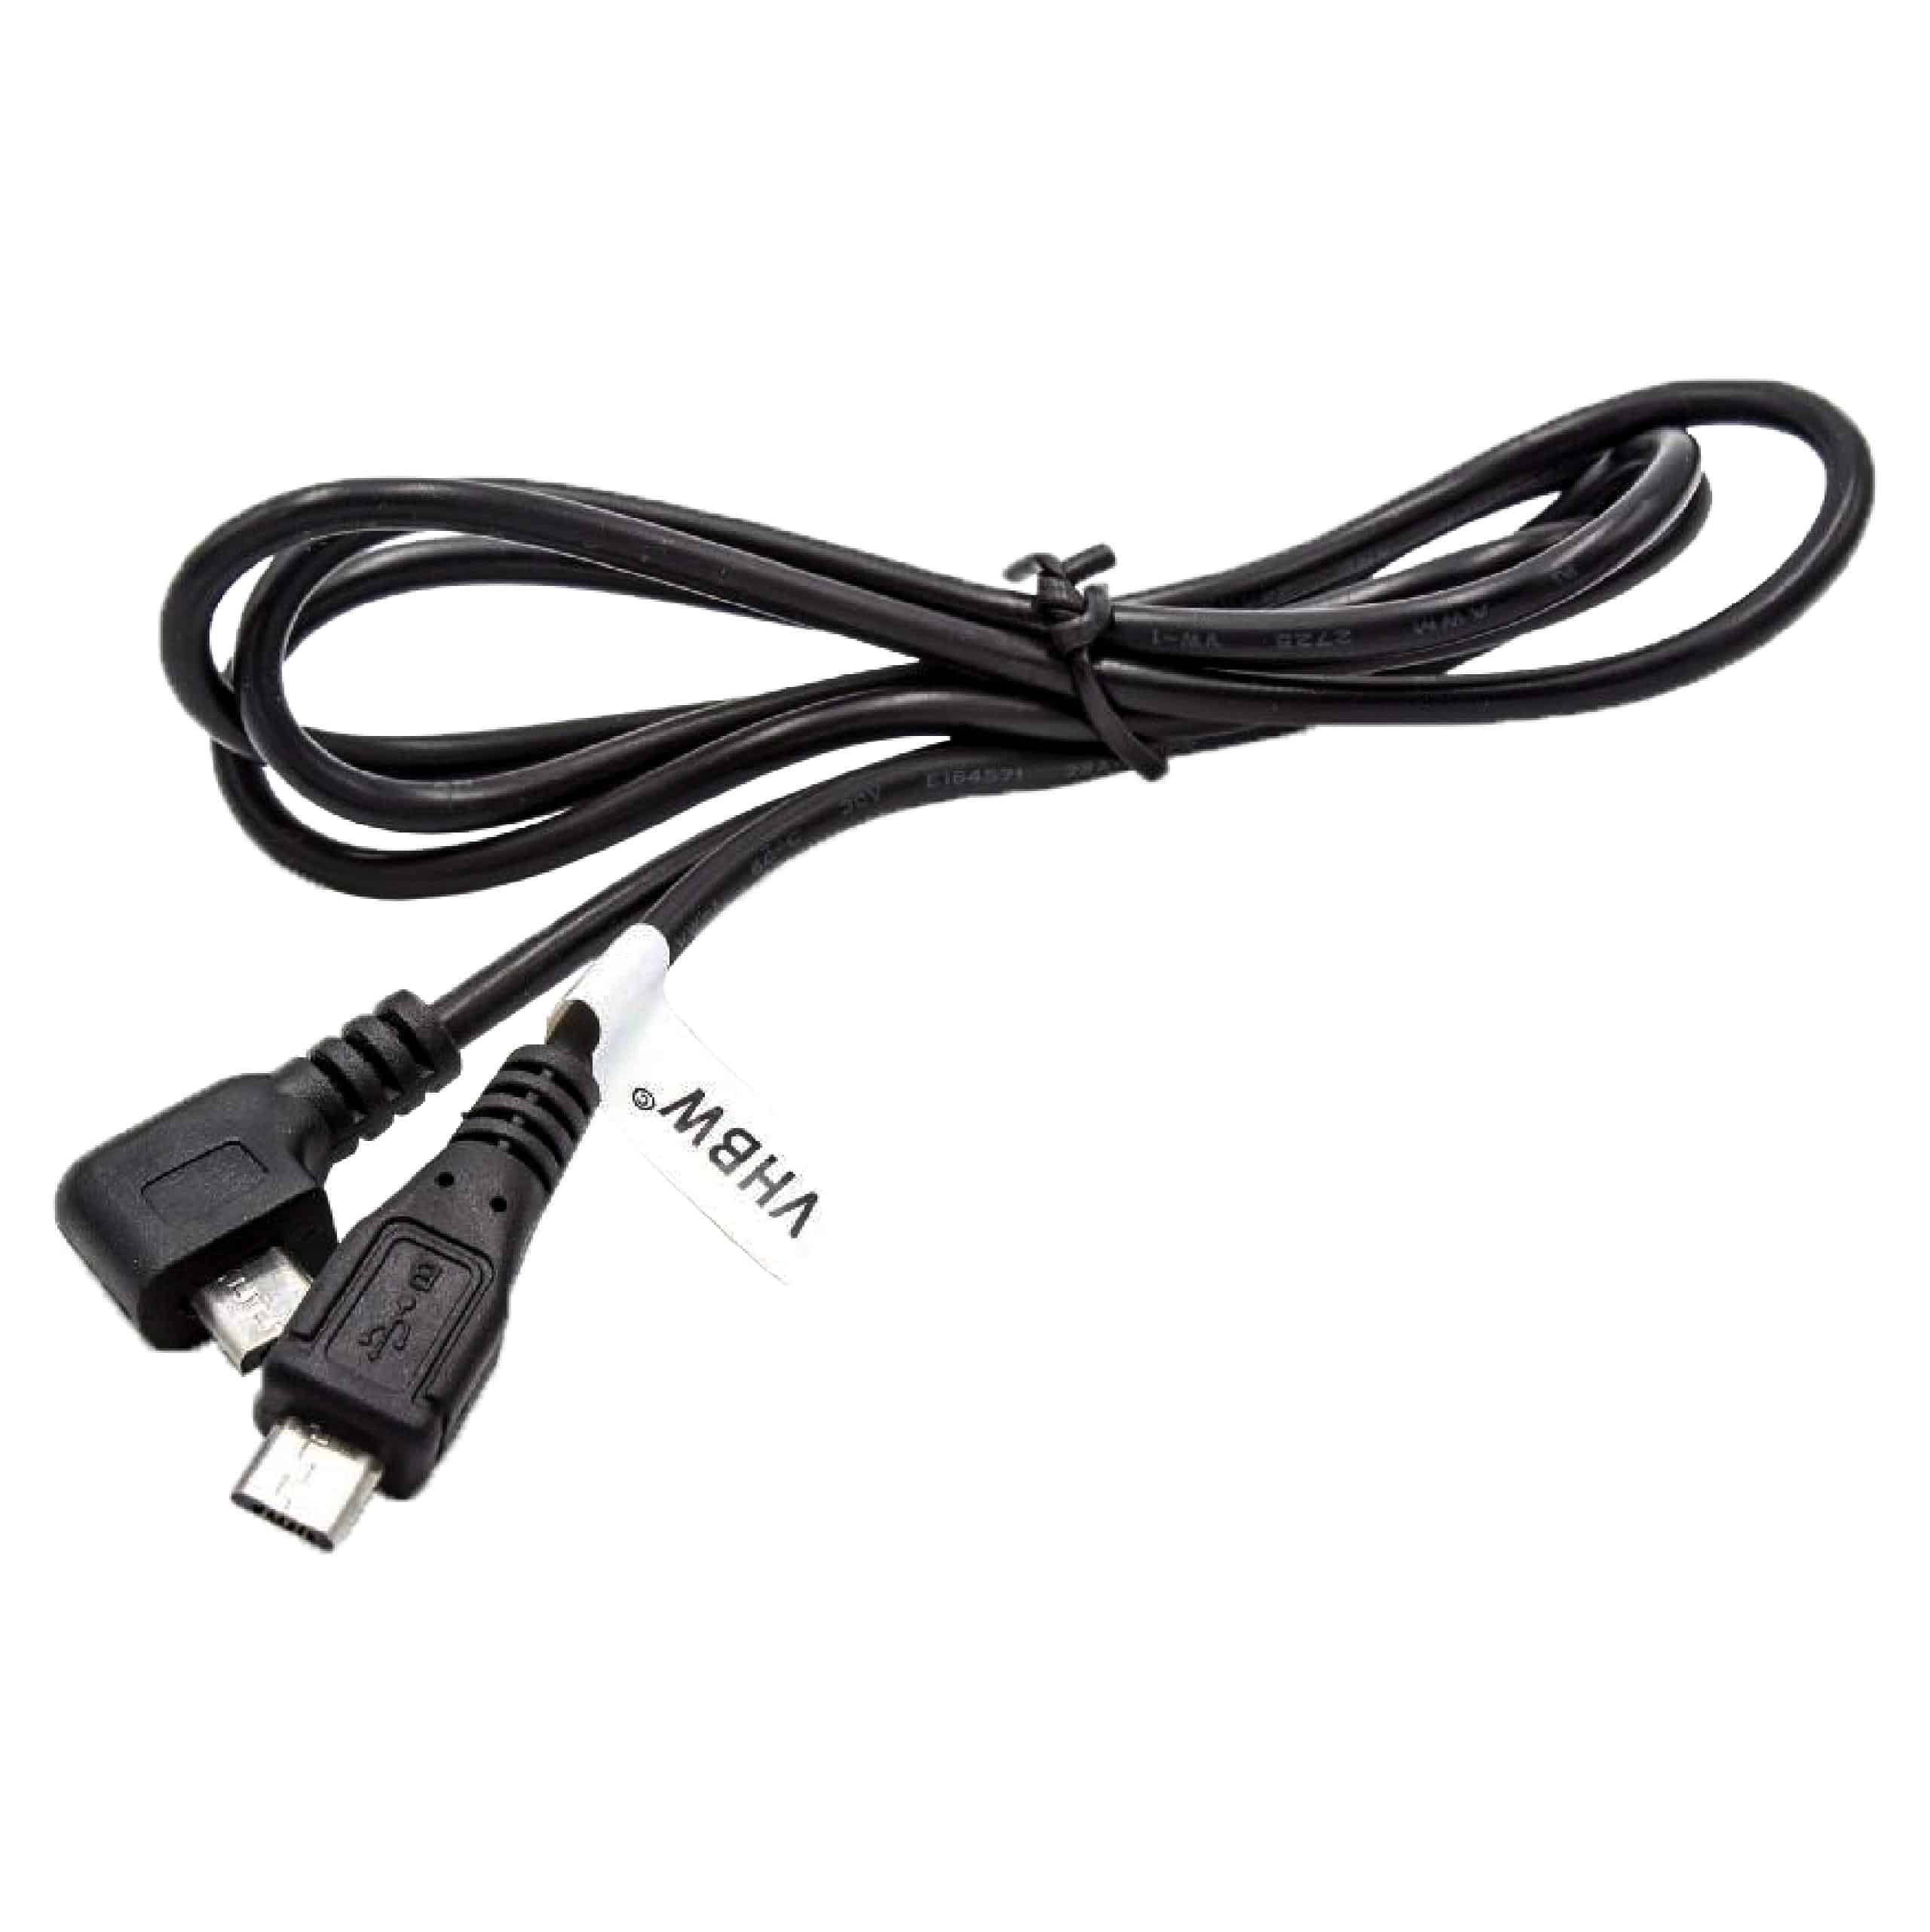 vhbw Power Sharing Cable Replacement for Samsung EP-SG900UWEGWW for Mobile Devices - Connection Cable, 100 cm